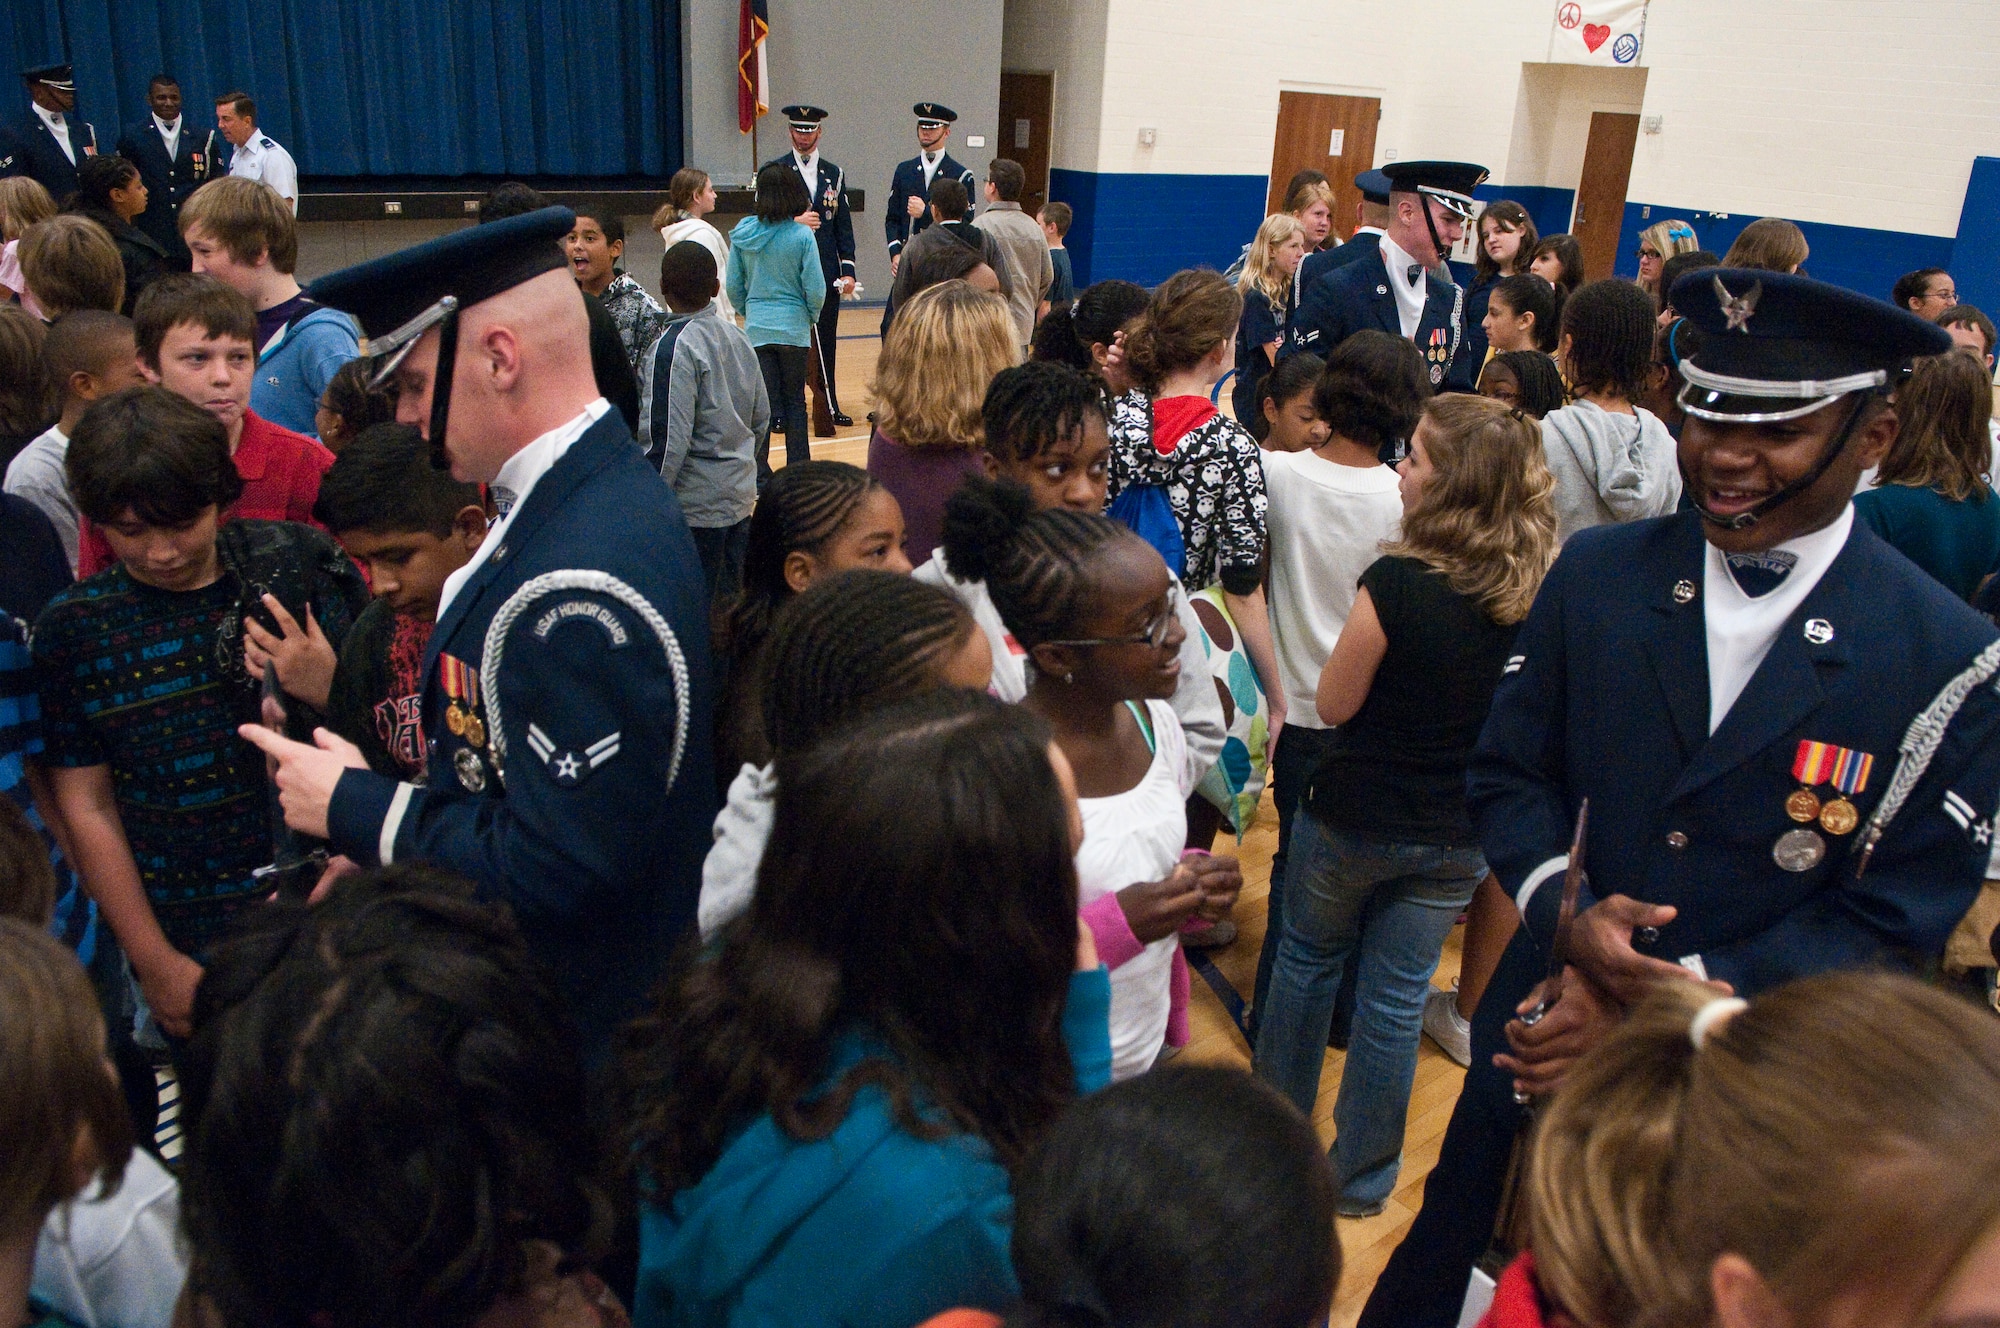 Air Force Drill Team members, Airman 1st Class Doyle Boyd (left) and Airman 1st Class Andrew Winders answer questions for middle school students at Randolph Independent School District  after a performance of Air Force precision and professionalism for the Ro-Hawks of Randolph High School Nov. 2. (U.S. Air Force photo/Steve Thurow)